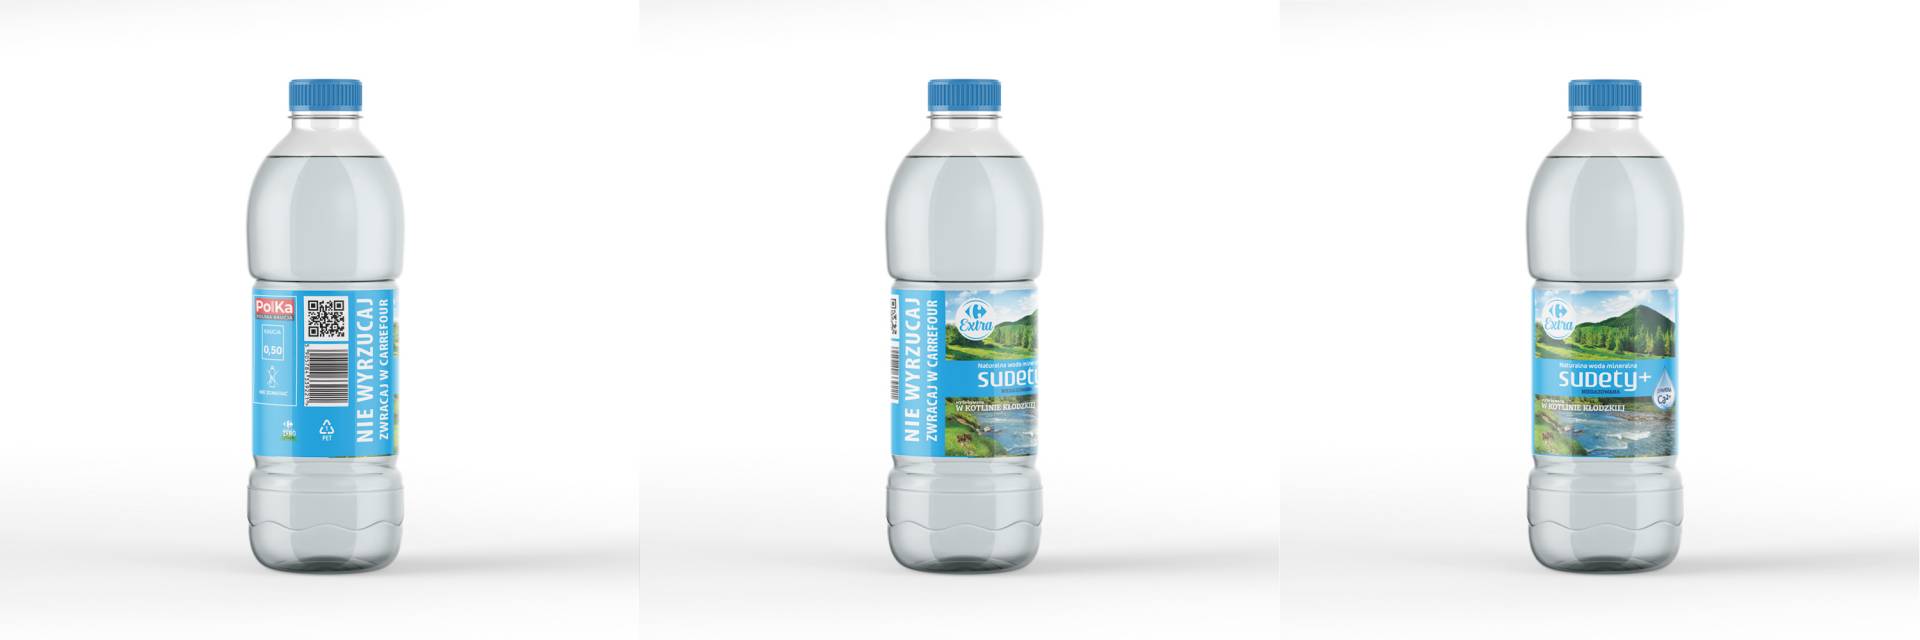 The first bottle compatible with the deposit system